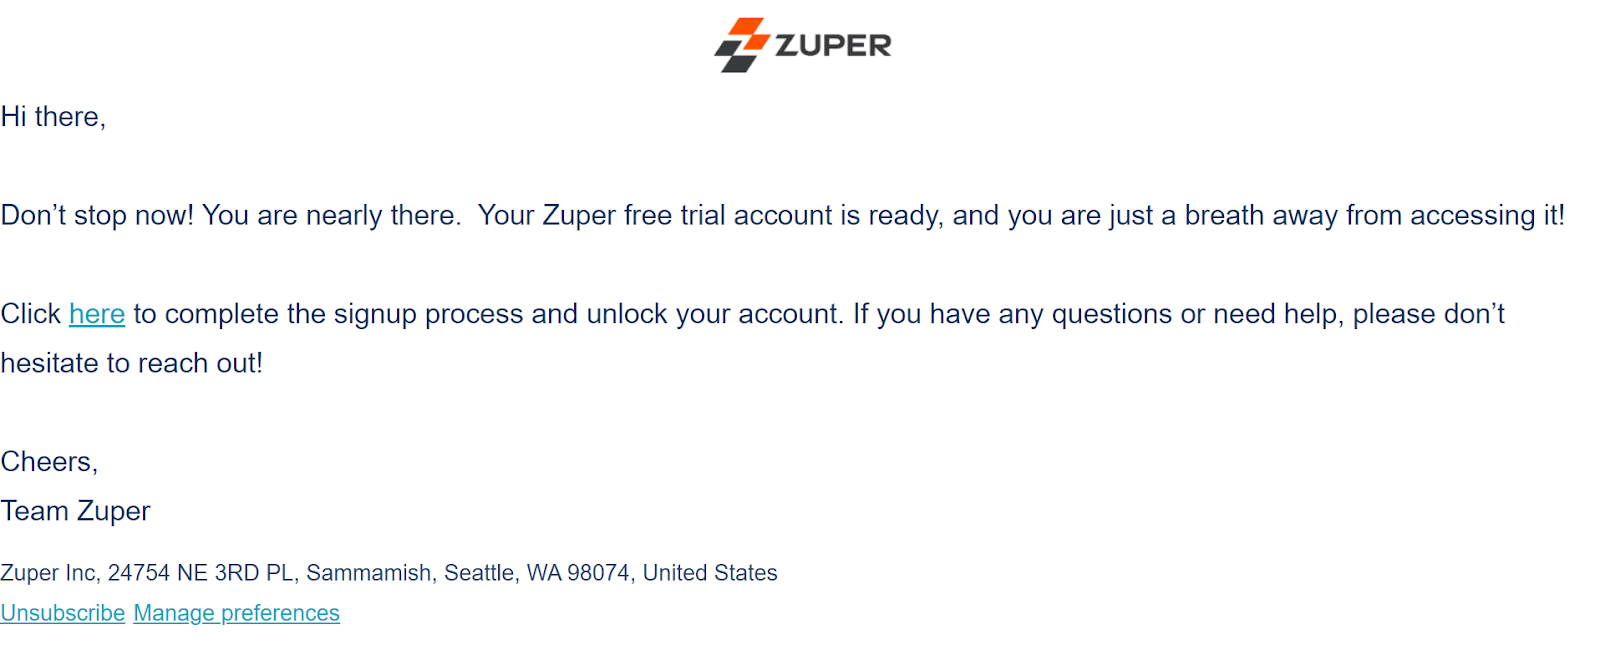 Zuper event email drip campaign series 3